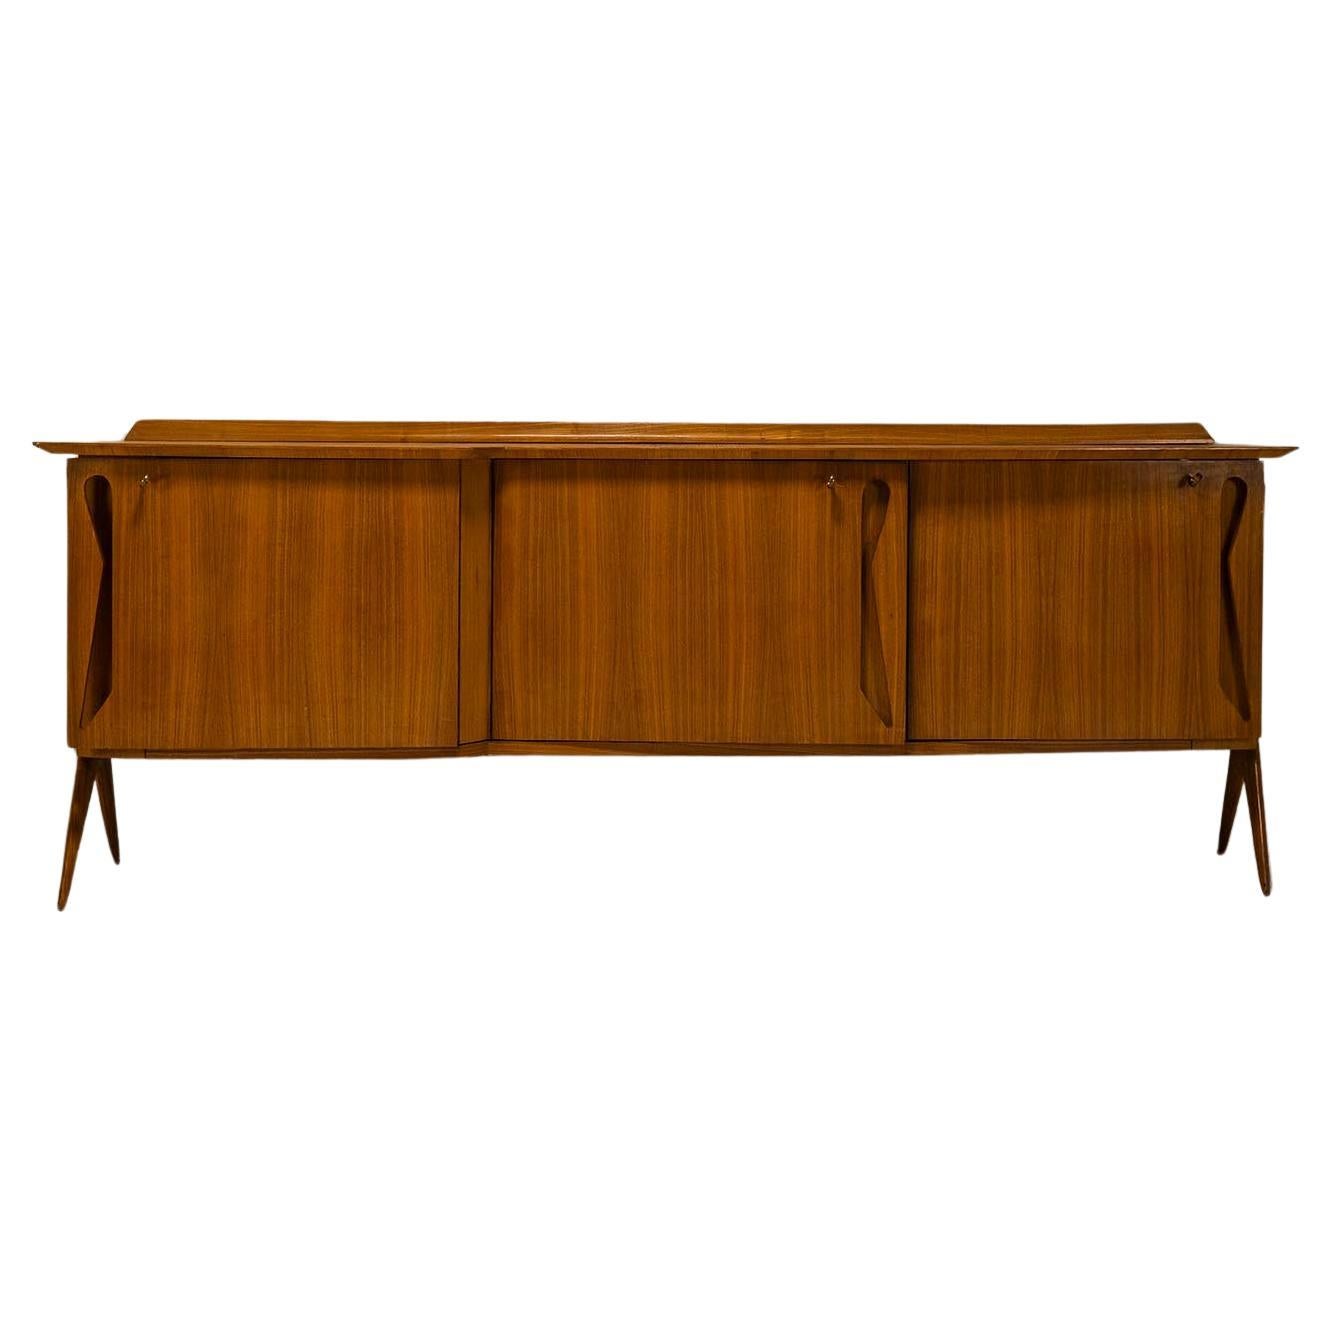 Ico Parisi Credenza in Teak Executed by Fratelli Rizzi, Italy 1950s